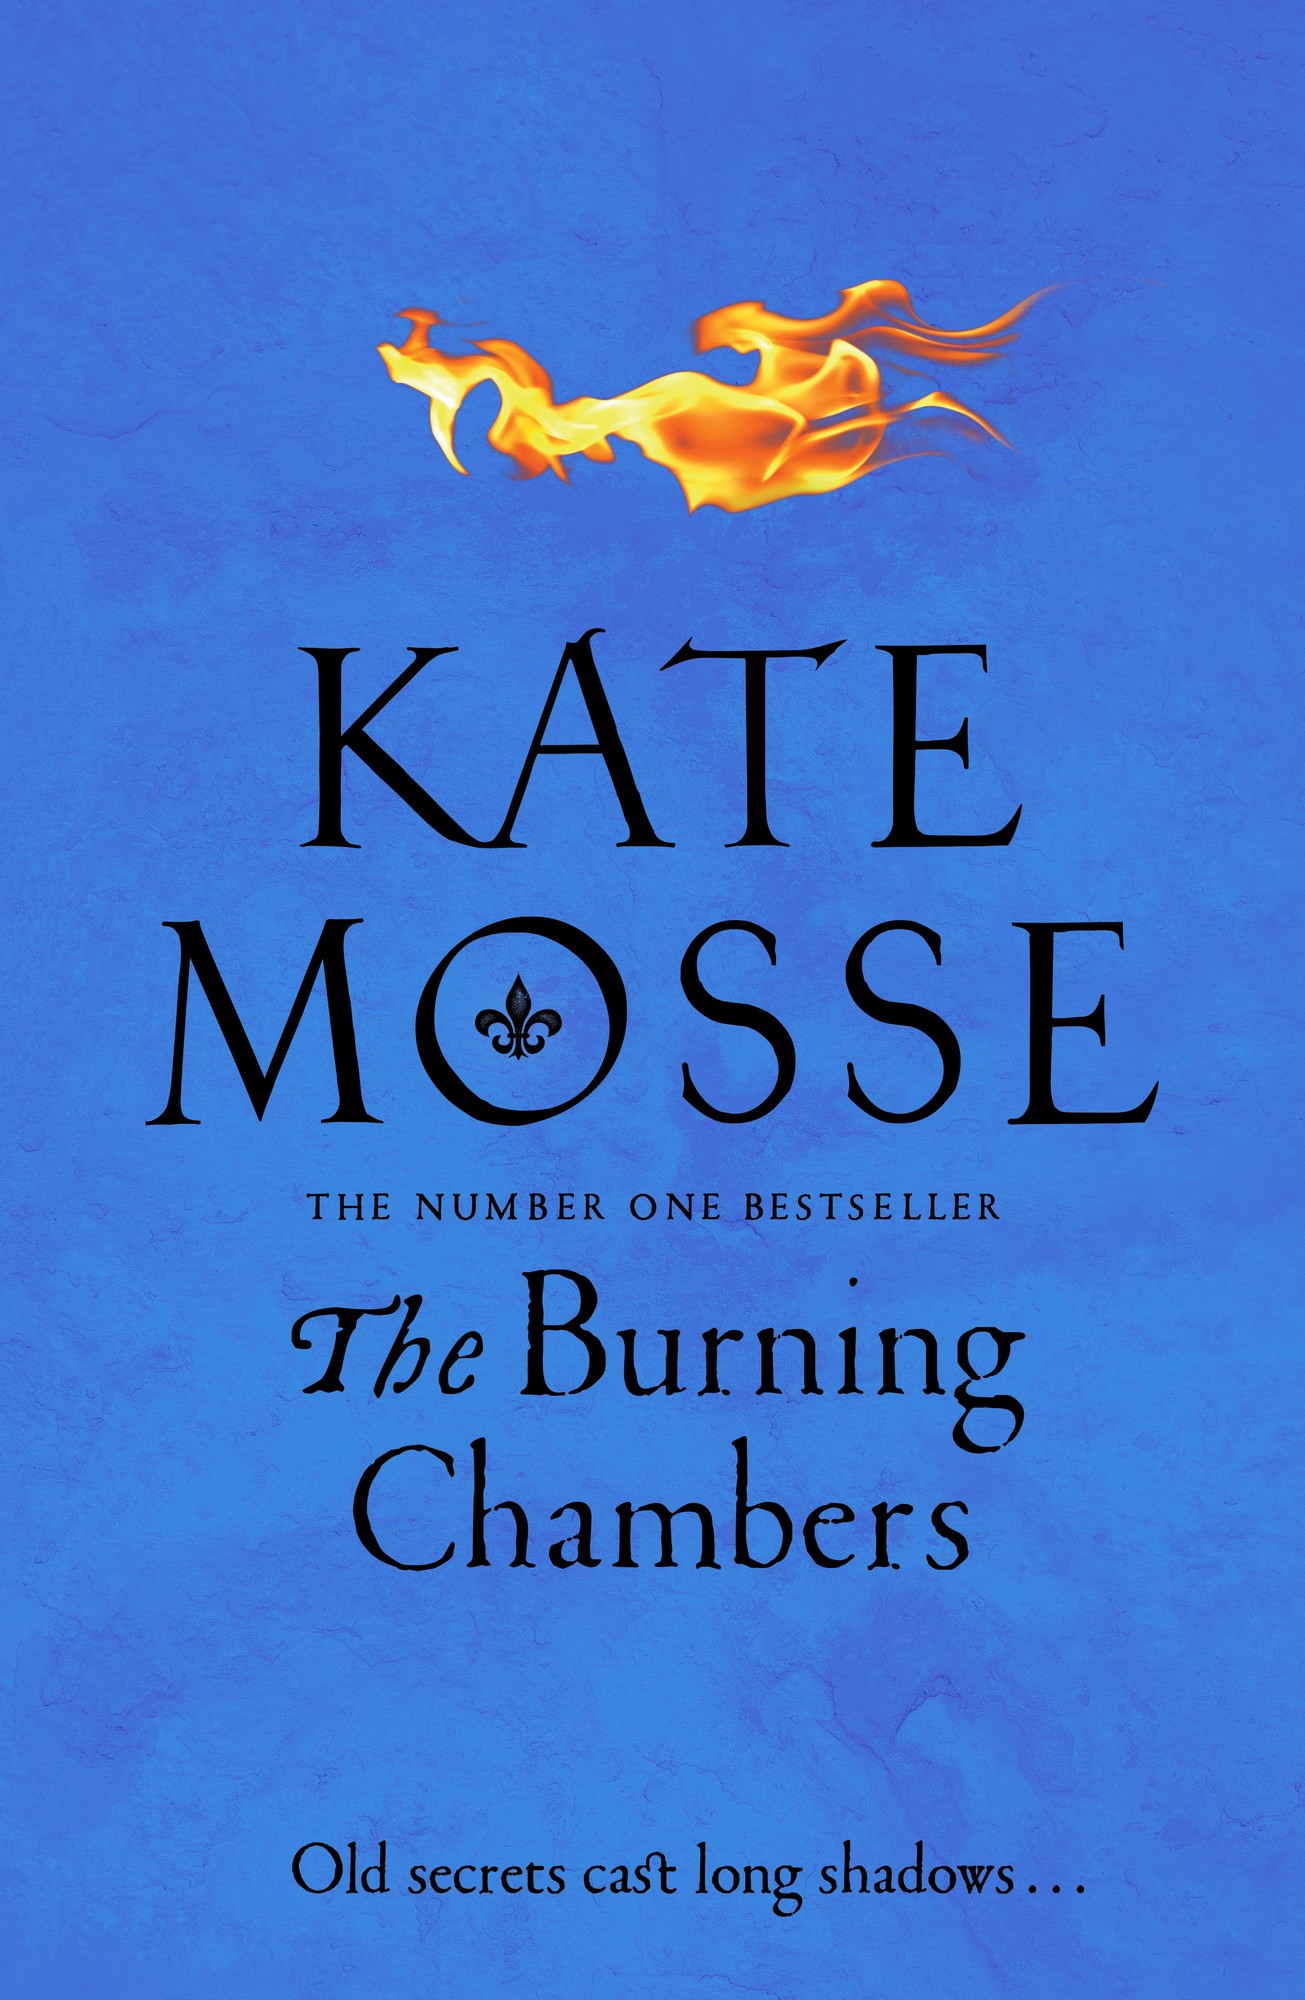 Book Launch The Burning Chambers by Kate Mosse Johannesburg